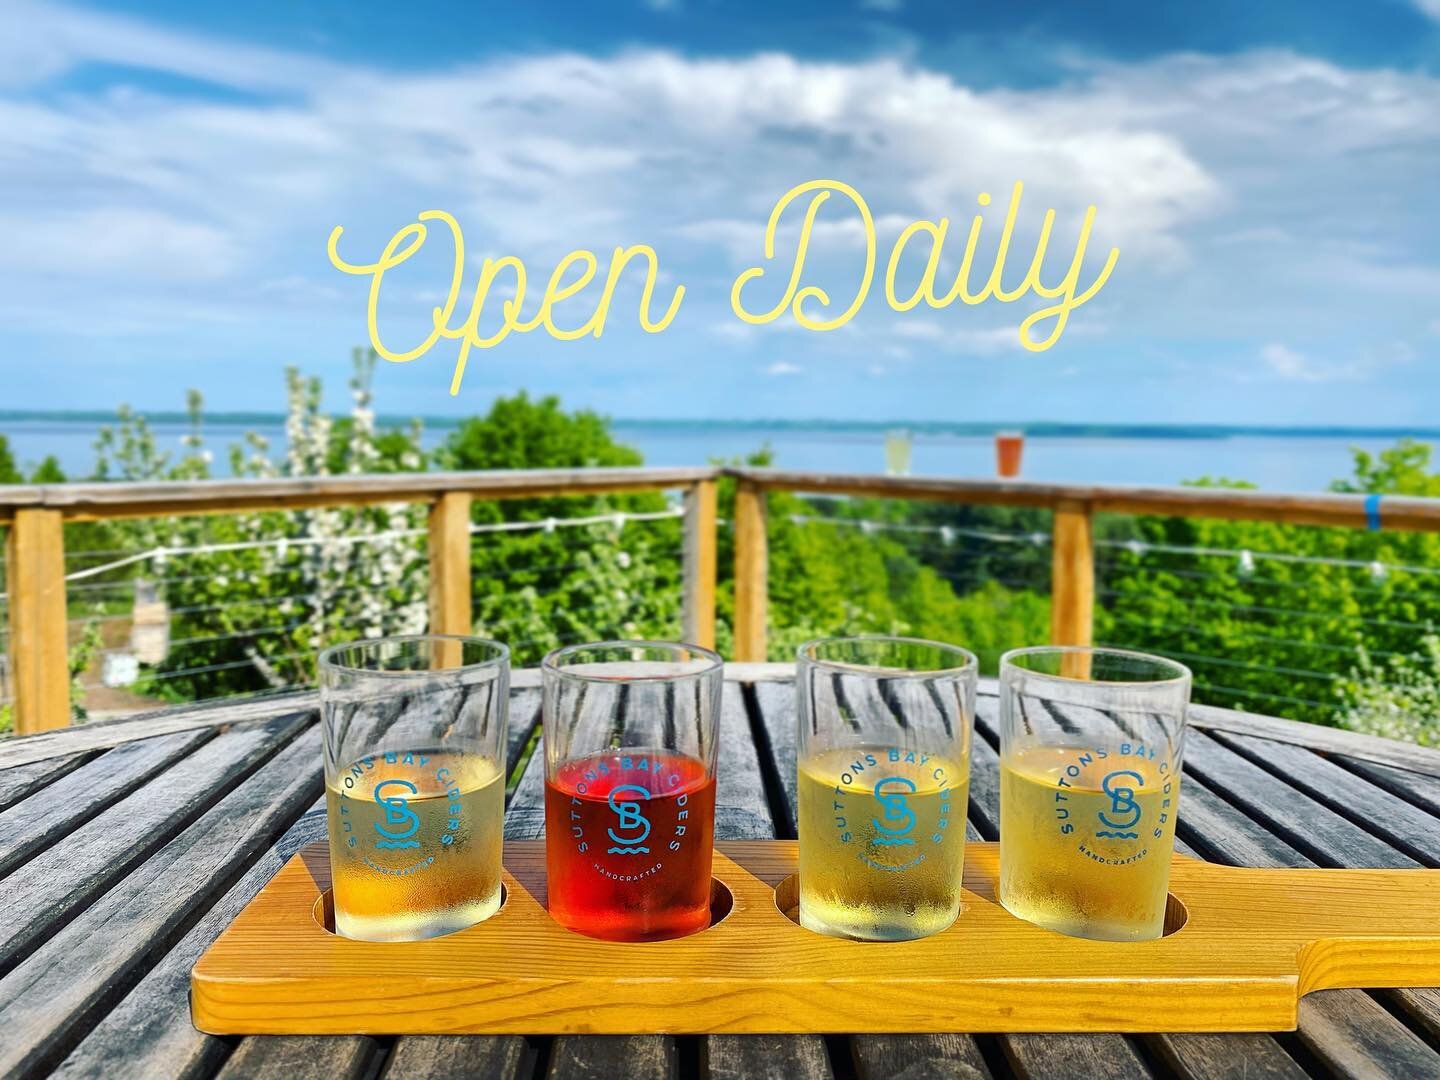 Everyday is Cider-day!! Open daily 12-7pm, 12-8pm on Fridays and 11-8pm on Saturdays. #TGICD #suttonsbayciders #suttonsbay #cider #cidery #hardcider #nomi #northernmichigan #upnorth #puremichigan #traversecity #madeinmichigan #pickcider #leelanau #le